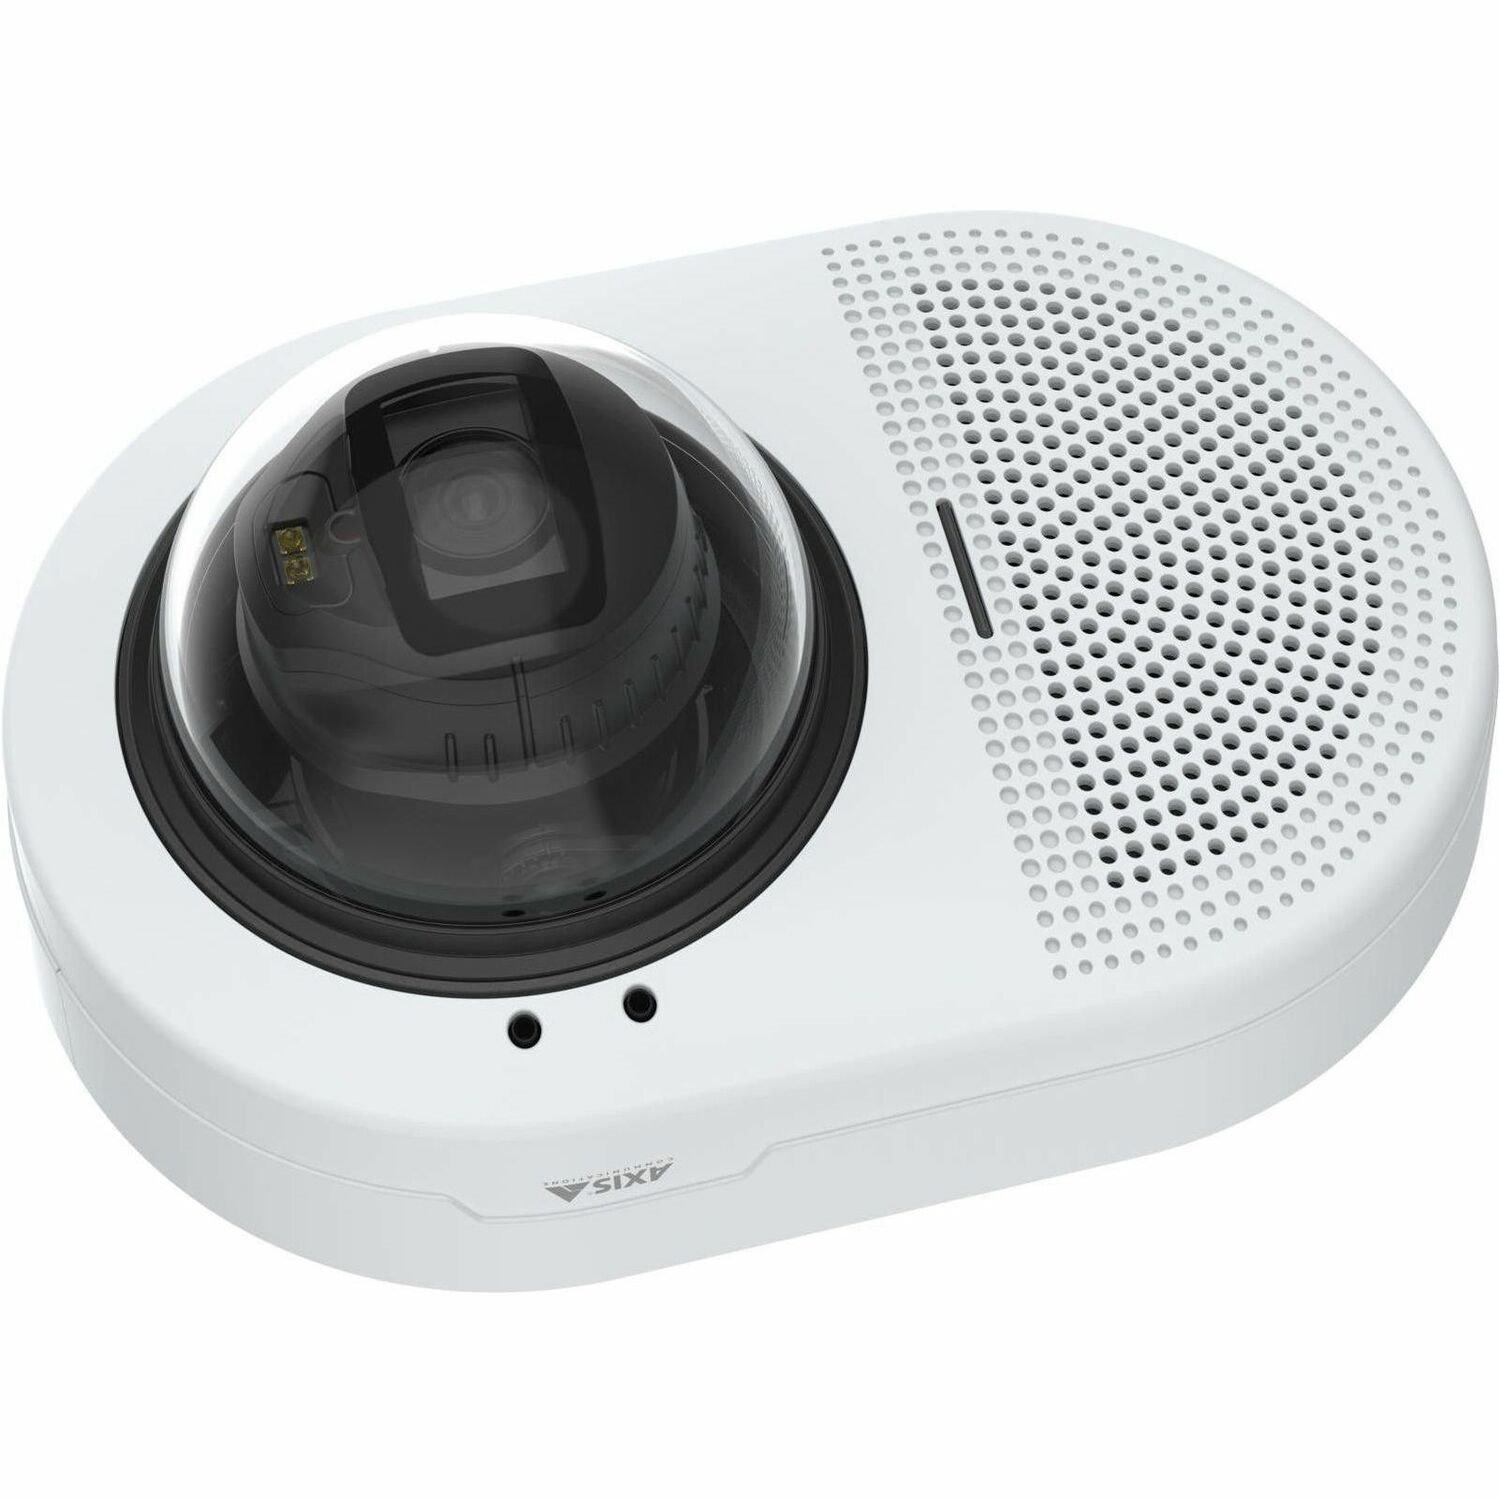 AXIS Q9307-LV 5 Megapixel Indoor Network Camera - Color - Dome - White